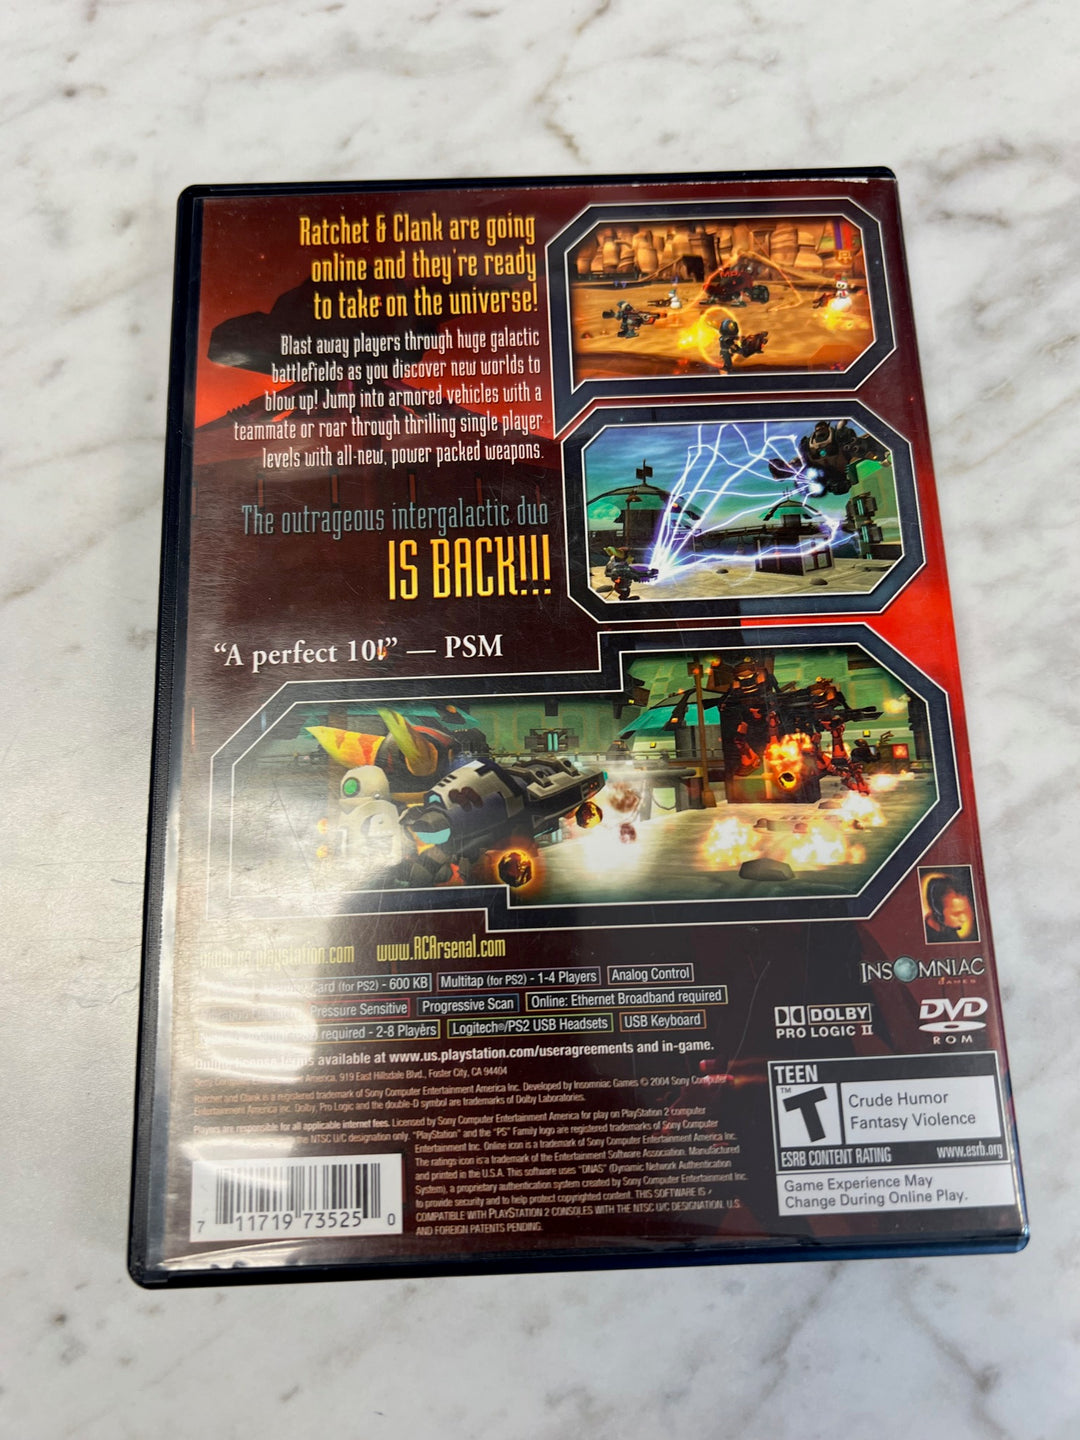 Ratchet & Clank Up Your Arsenal for PS2 Playstation 2 Case Only No Game DU62724